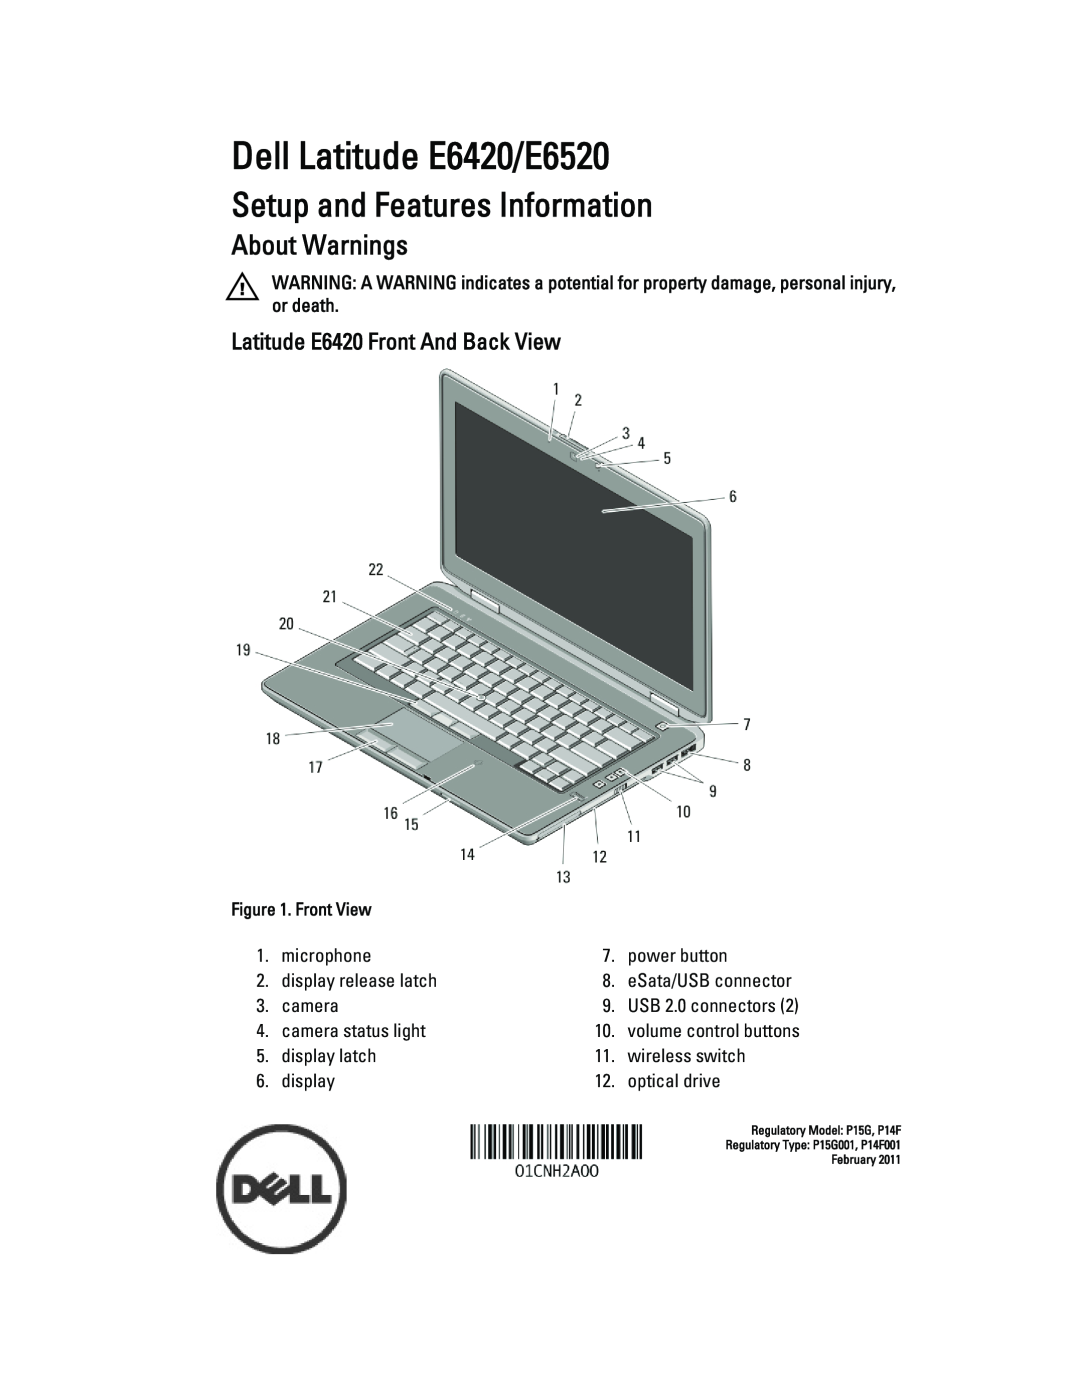 Dell manual Latitude E6420 Front And Back View, Dell Latitude E6420/E6520, Setup and Features Information 